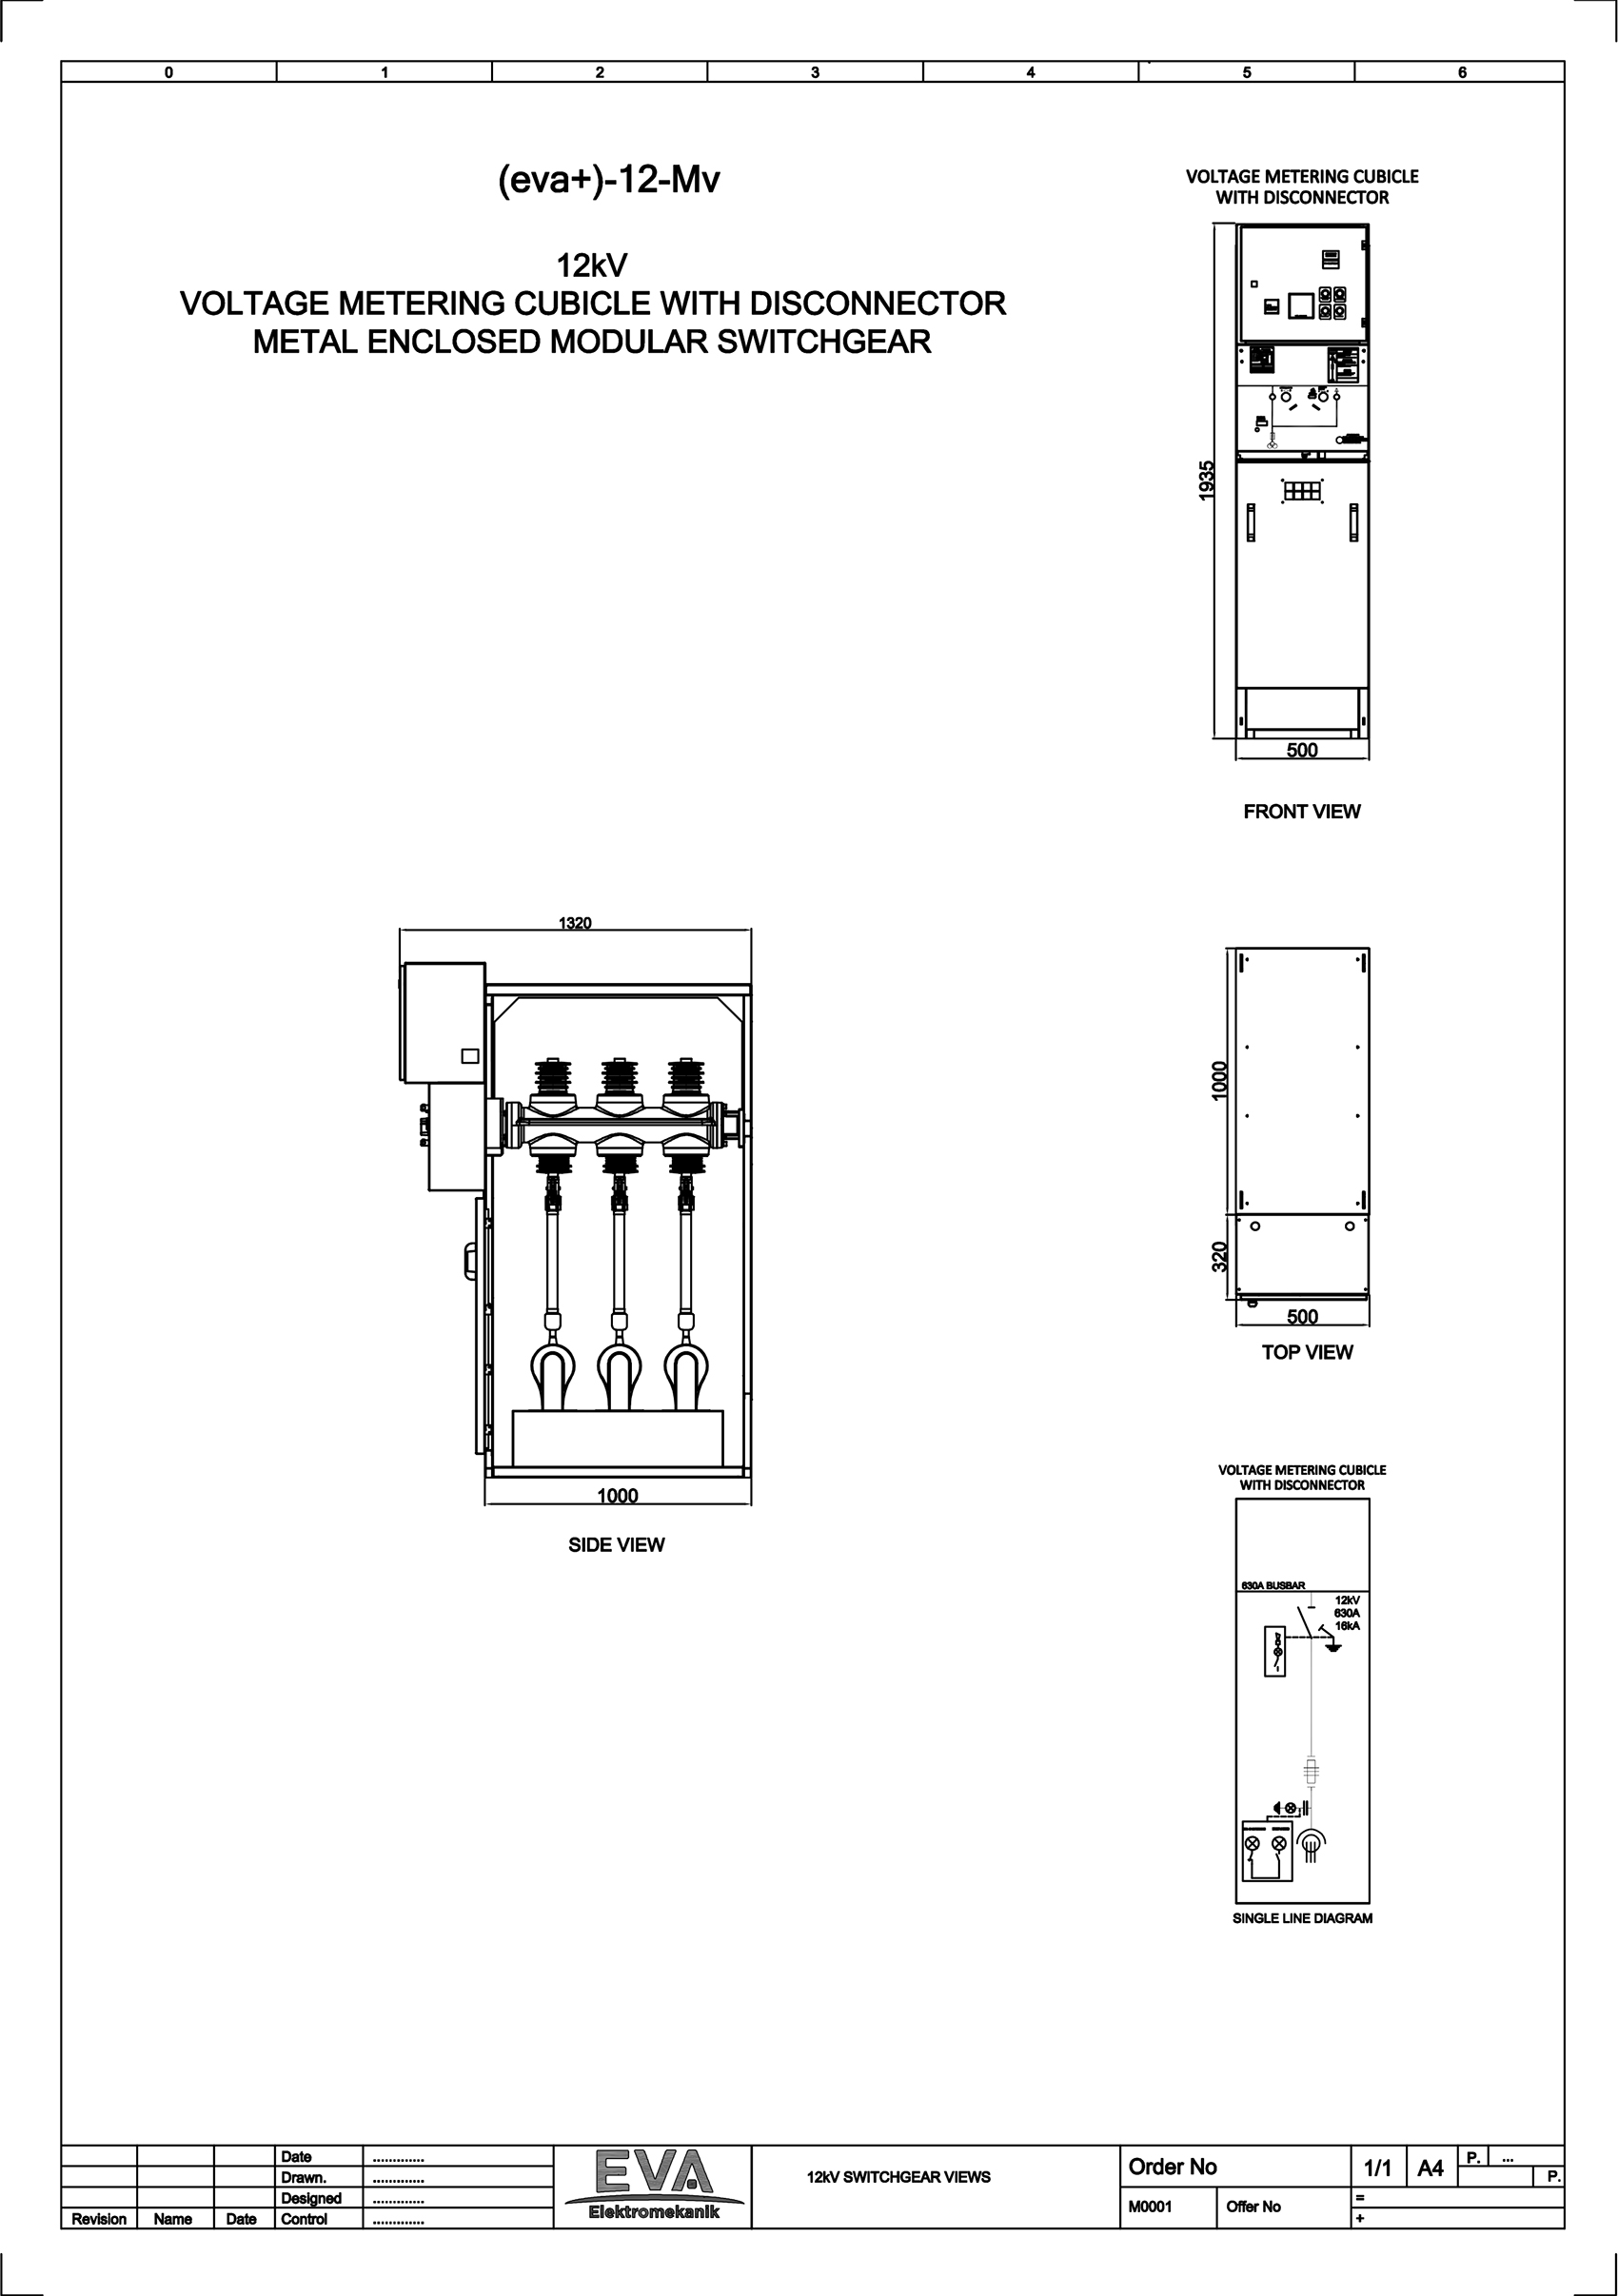 Voltage Metering Cubicle with Disconnector	